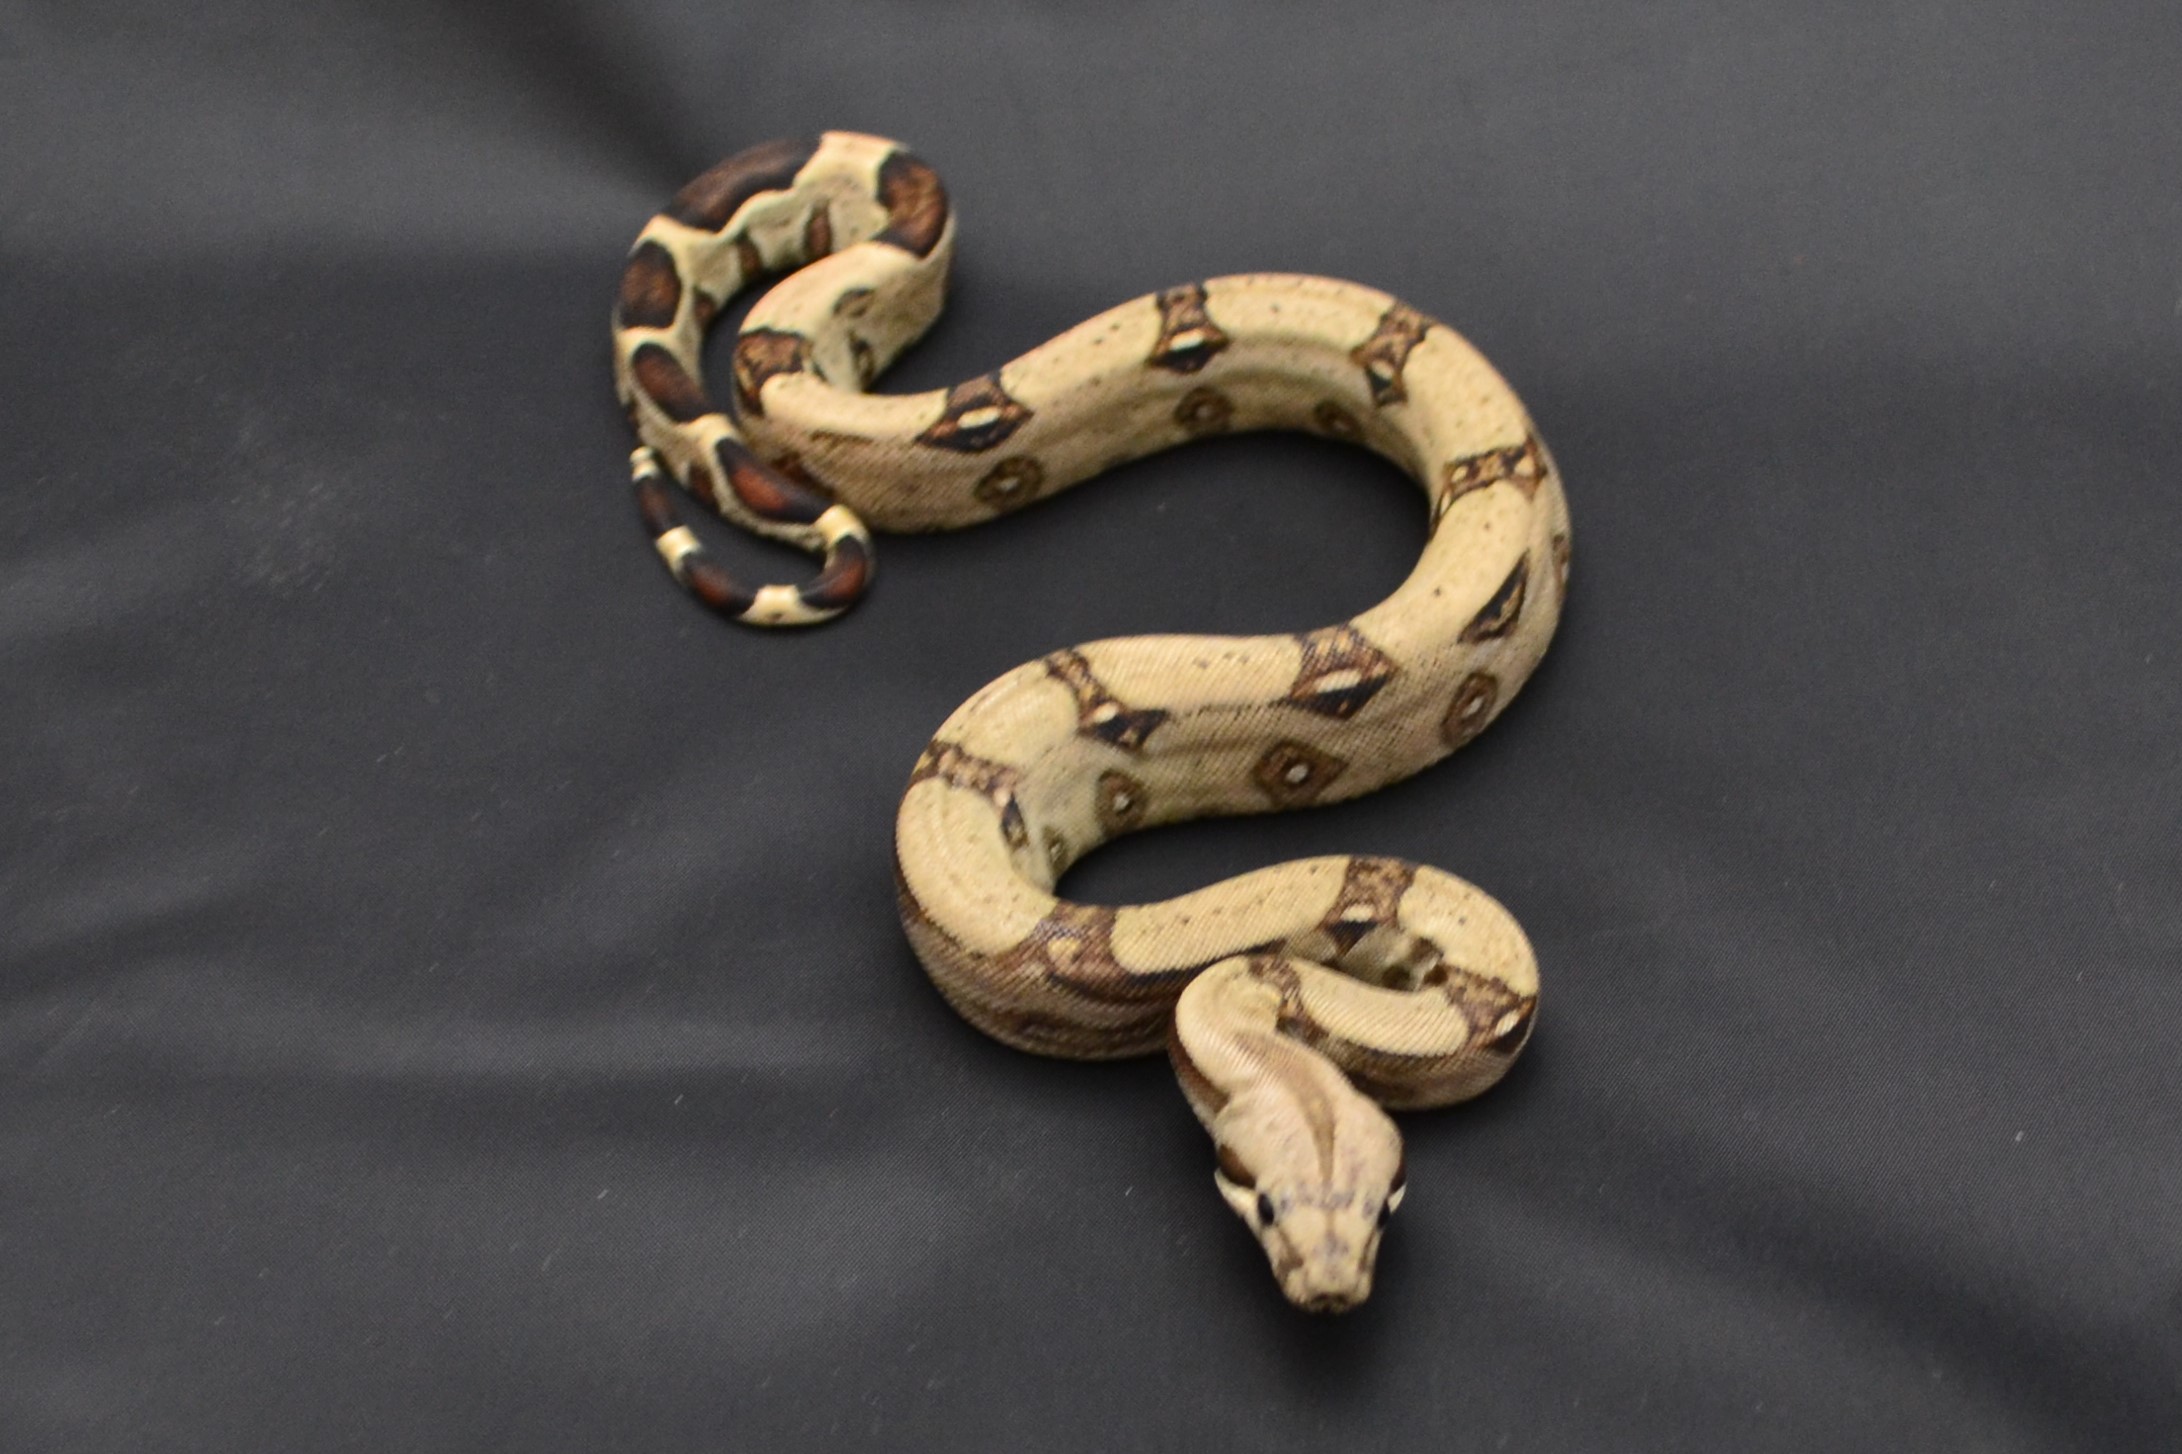 NORMAL Boa Constrictor by Redsand Reptiles